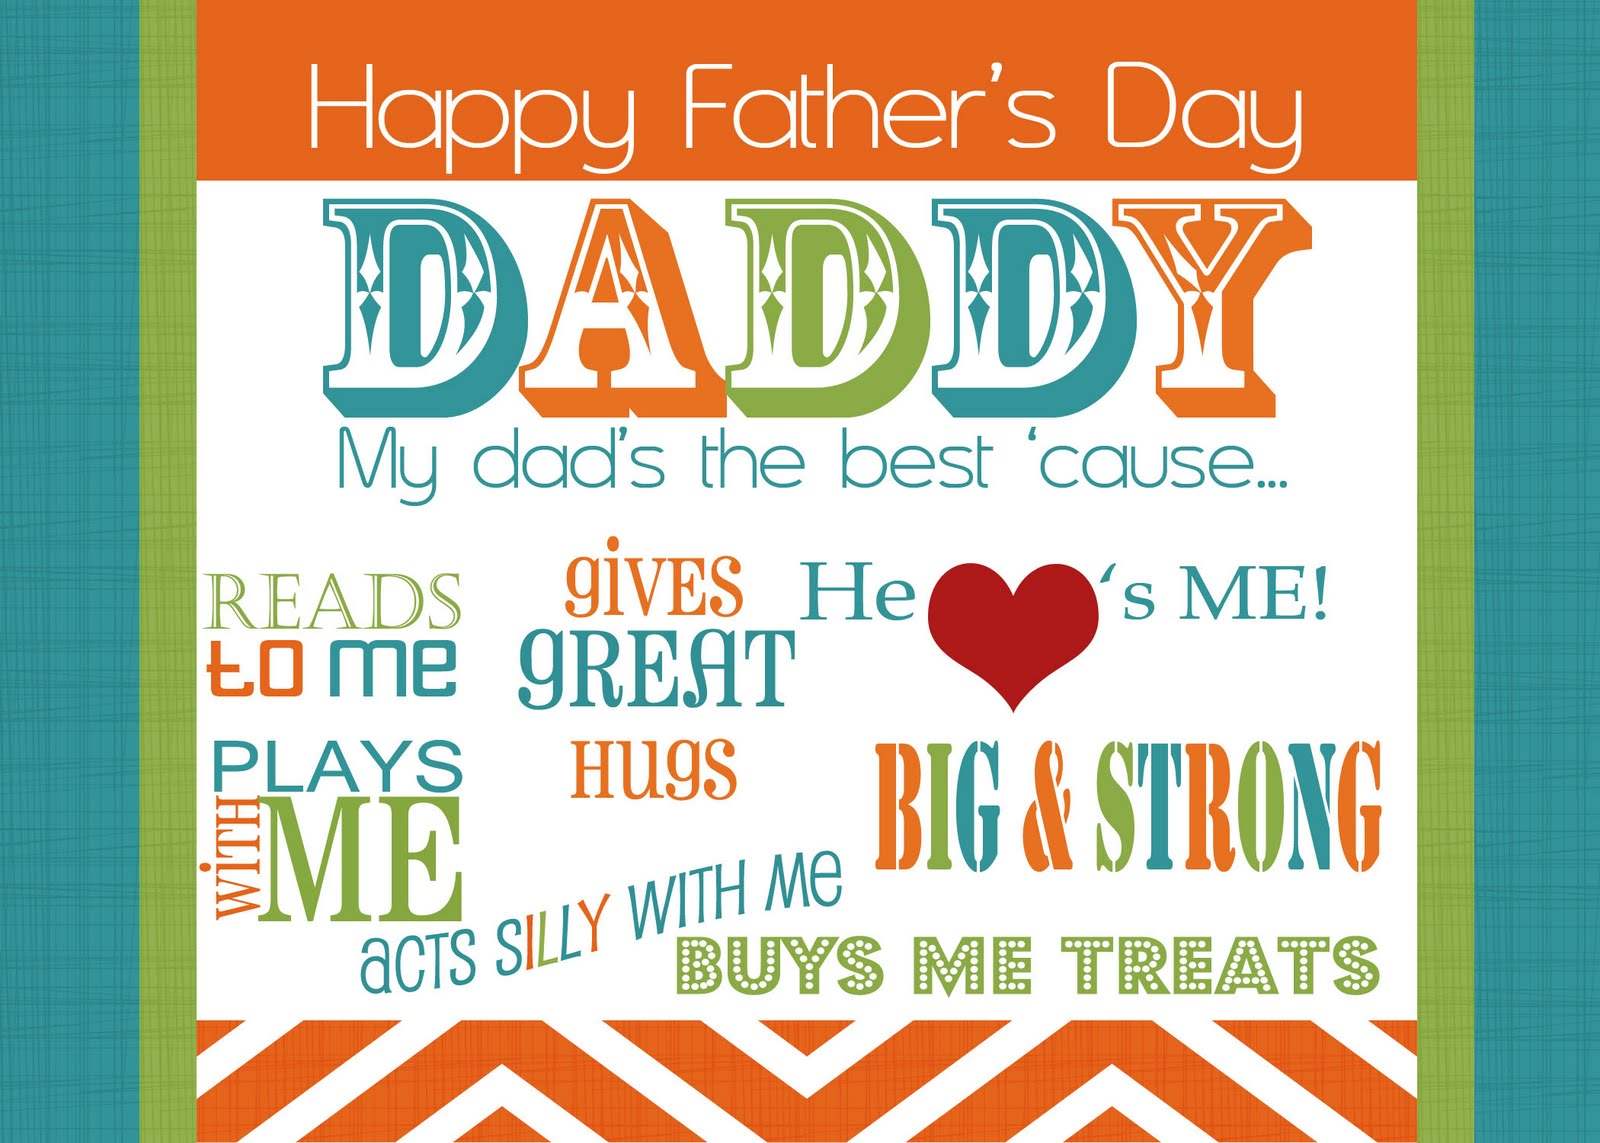 Printable-Fathers-Day-Cards-20151